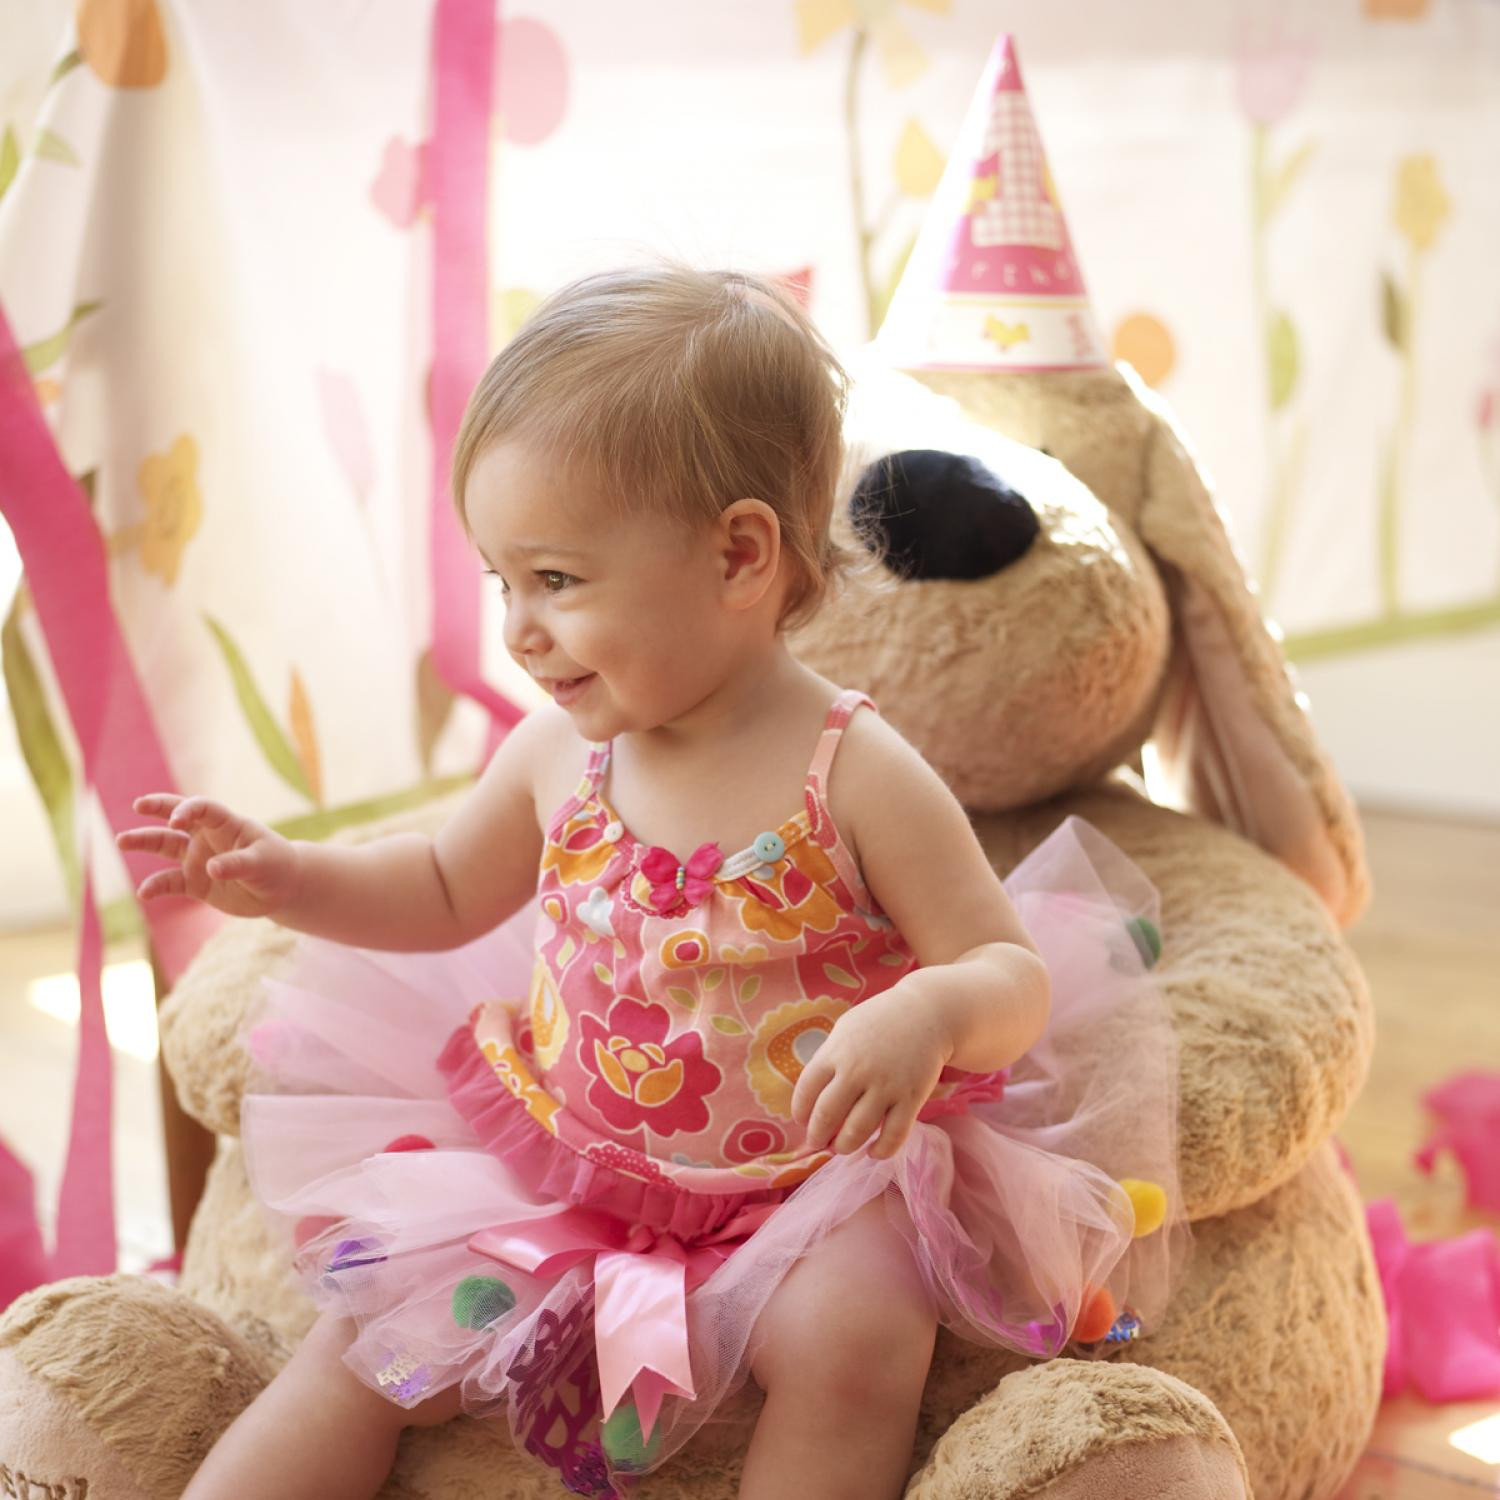 Birthday Party Themes For 1 Year Old Baby Girl
 20 Fun Baby s 1st Birthday Party Ideas